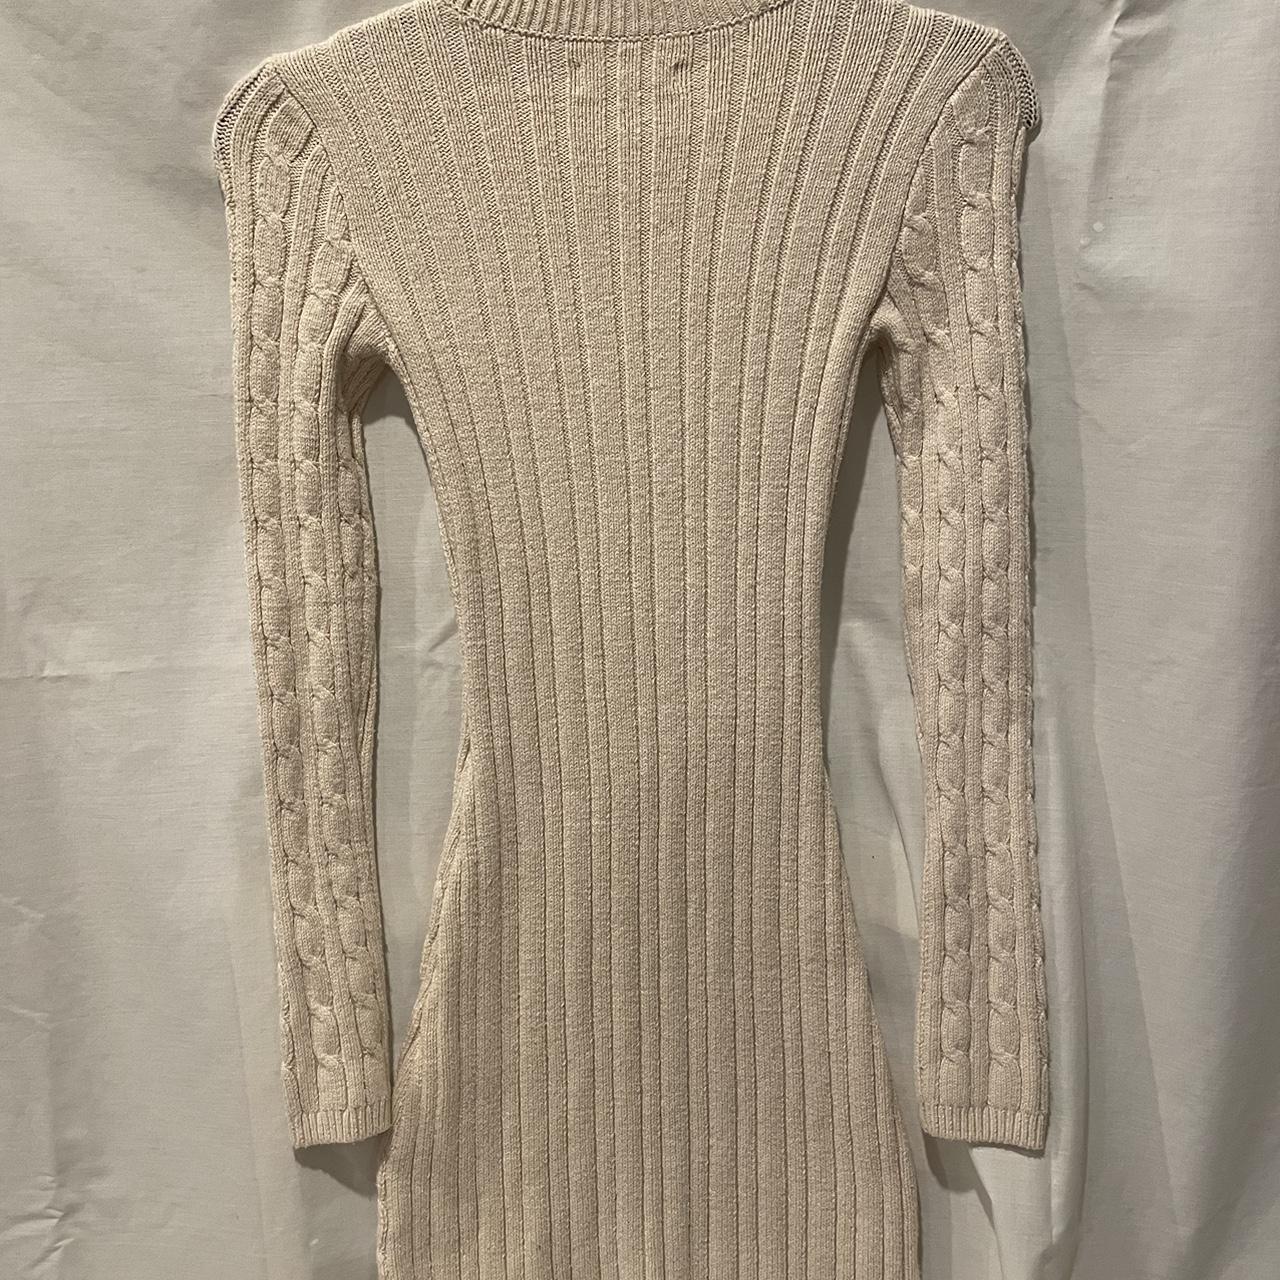 Hollister Cable Knit White Sweater Dress. This is - Depop